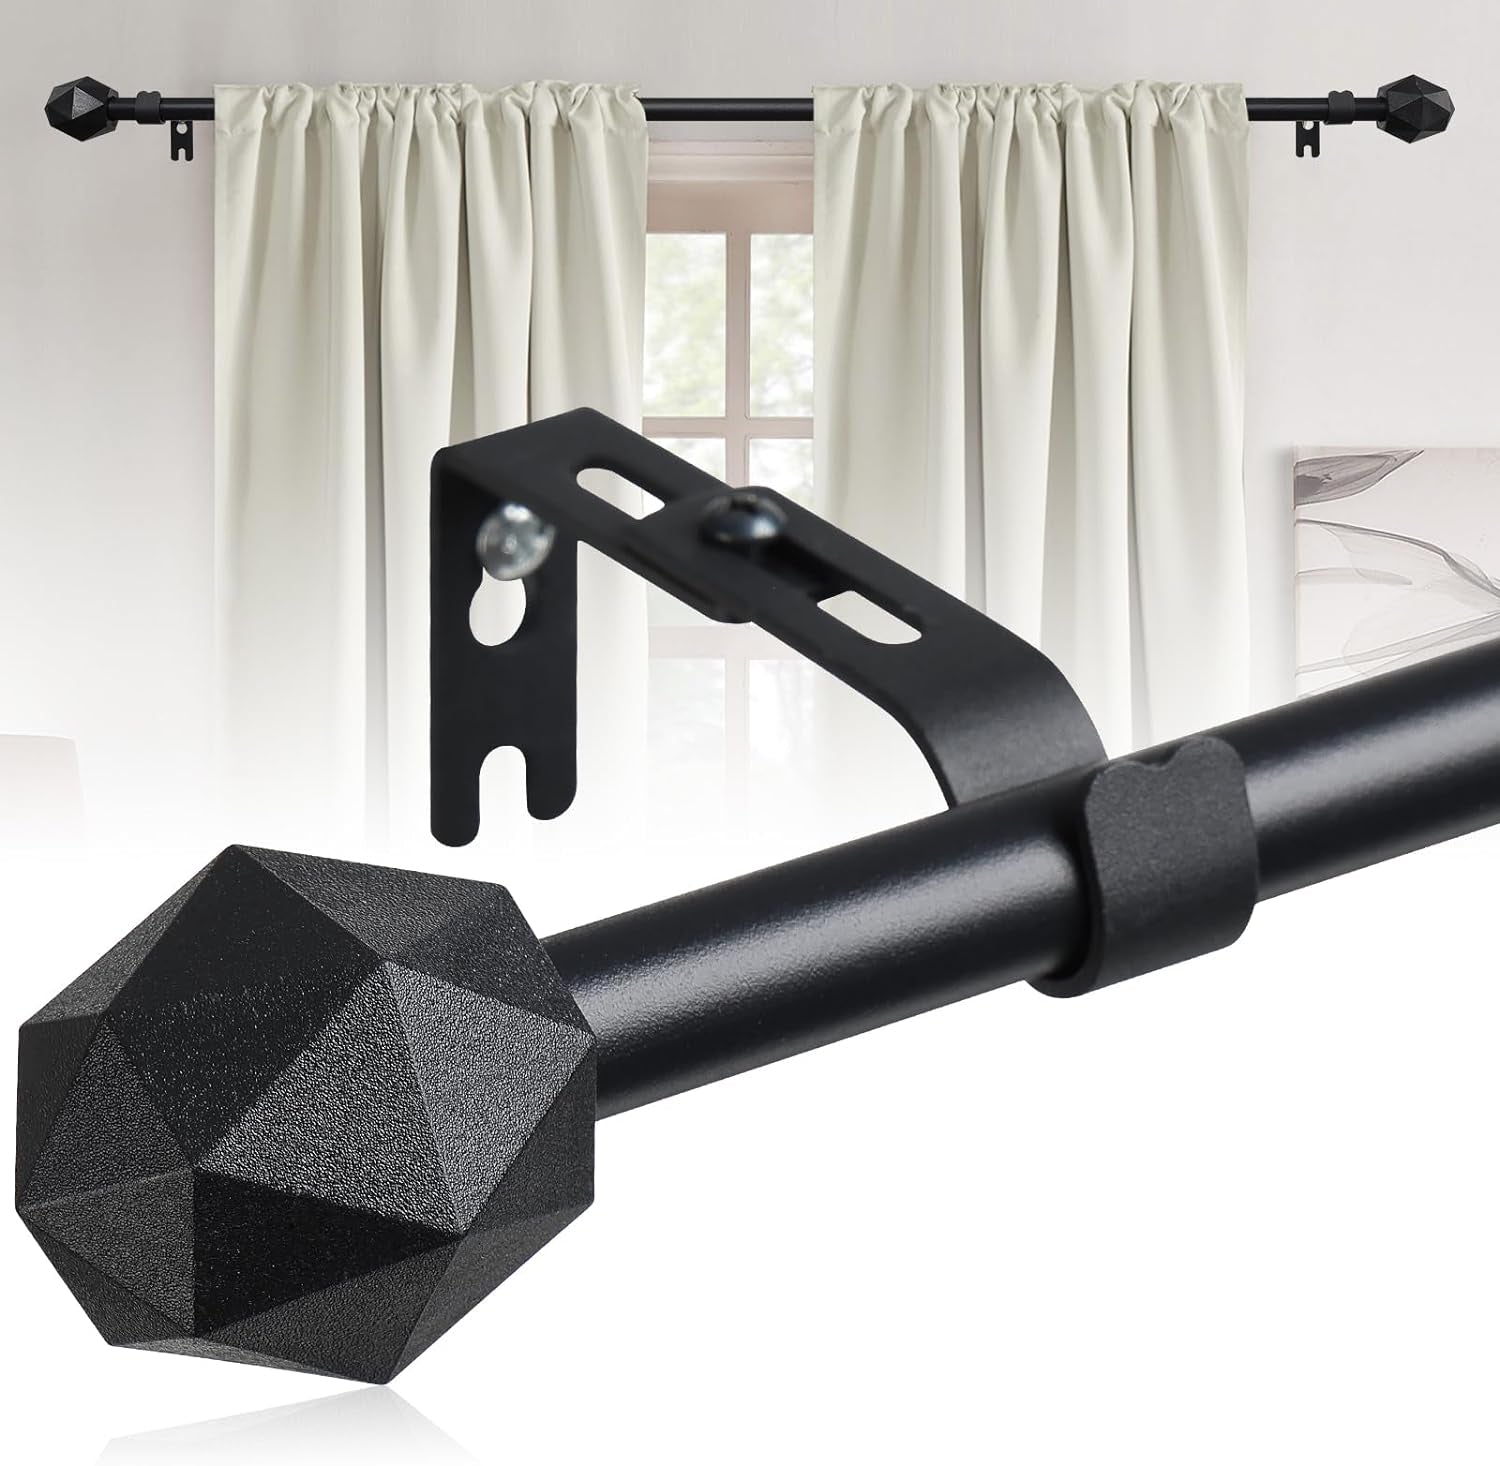 Curtain Rods for Windows 48 to 93 Inch - 5/8" Metal Heavy Duty Curtain Pole with Adjustable Brackets, Outdoor Curtain Rods for Patio,Living Room,Sliding Glass Door - Matte Black Decorative Curtain Rod  LAKEROD Matte Black 48-93" 